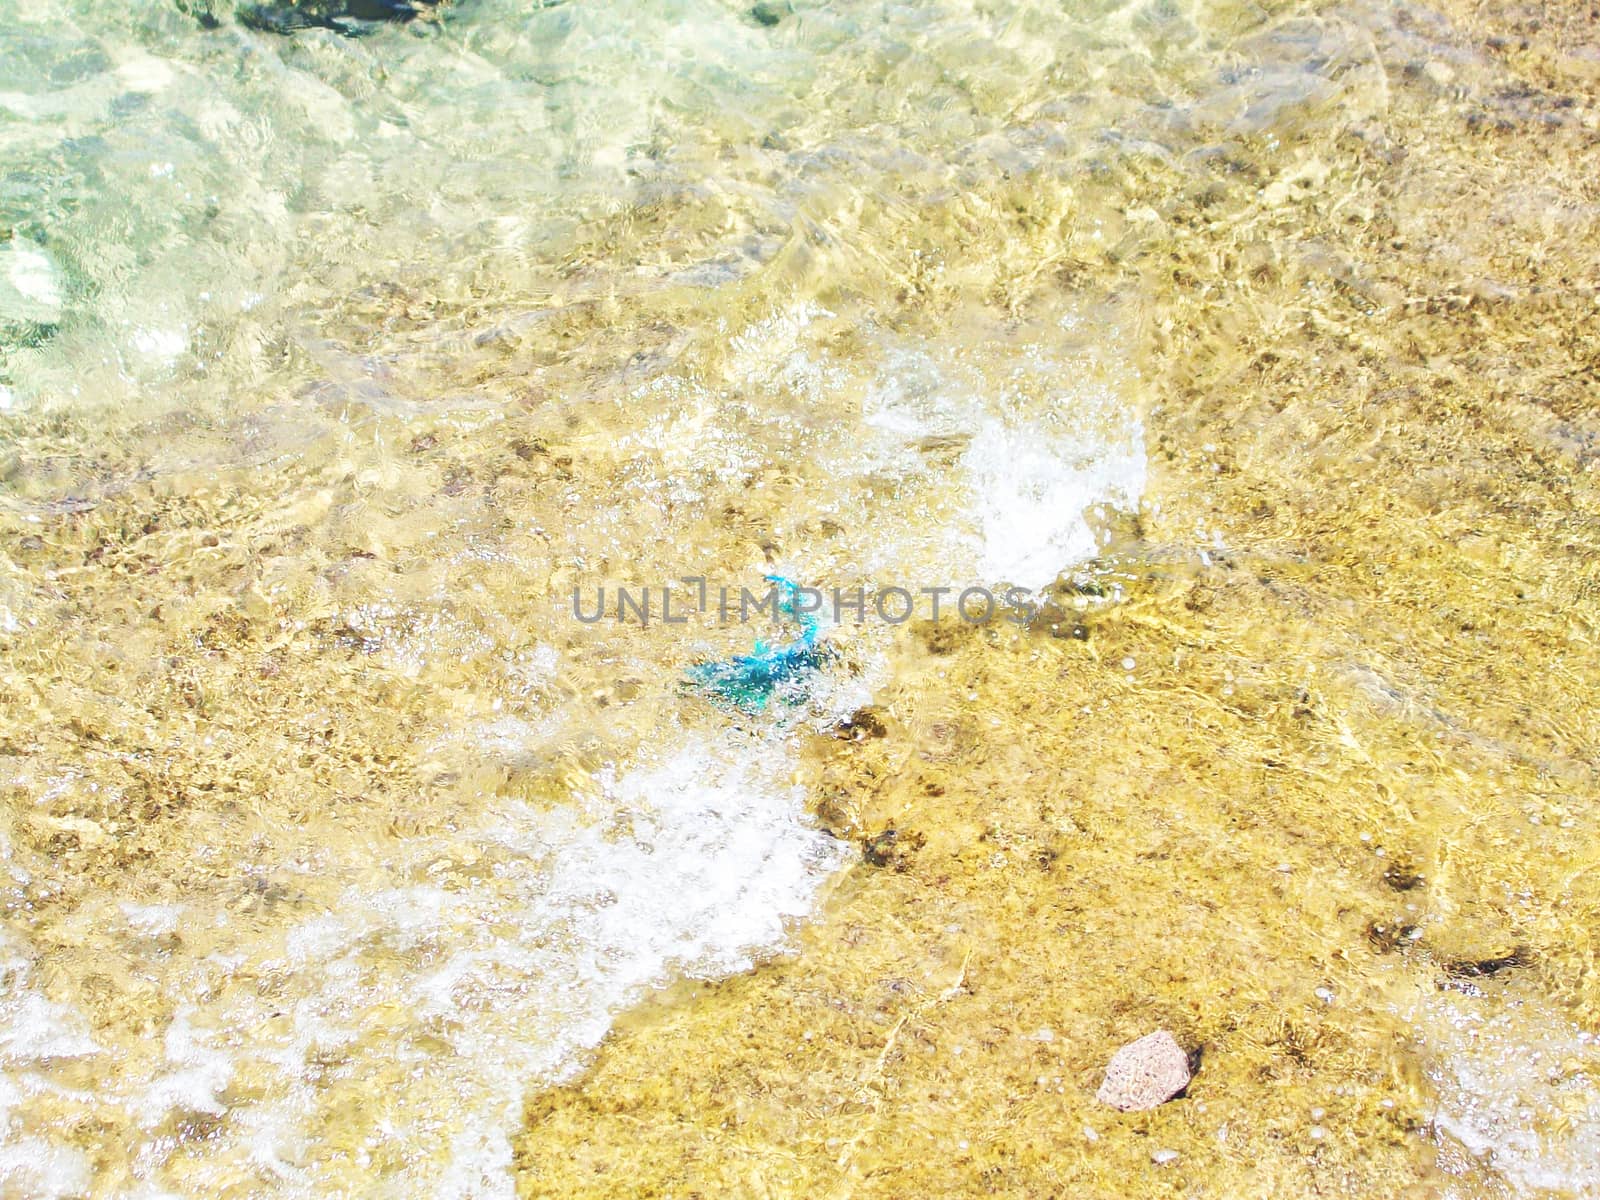 Сlear transparent water in the shallows of the coastal beach